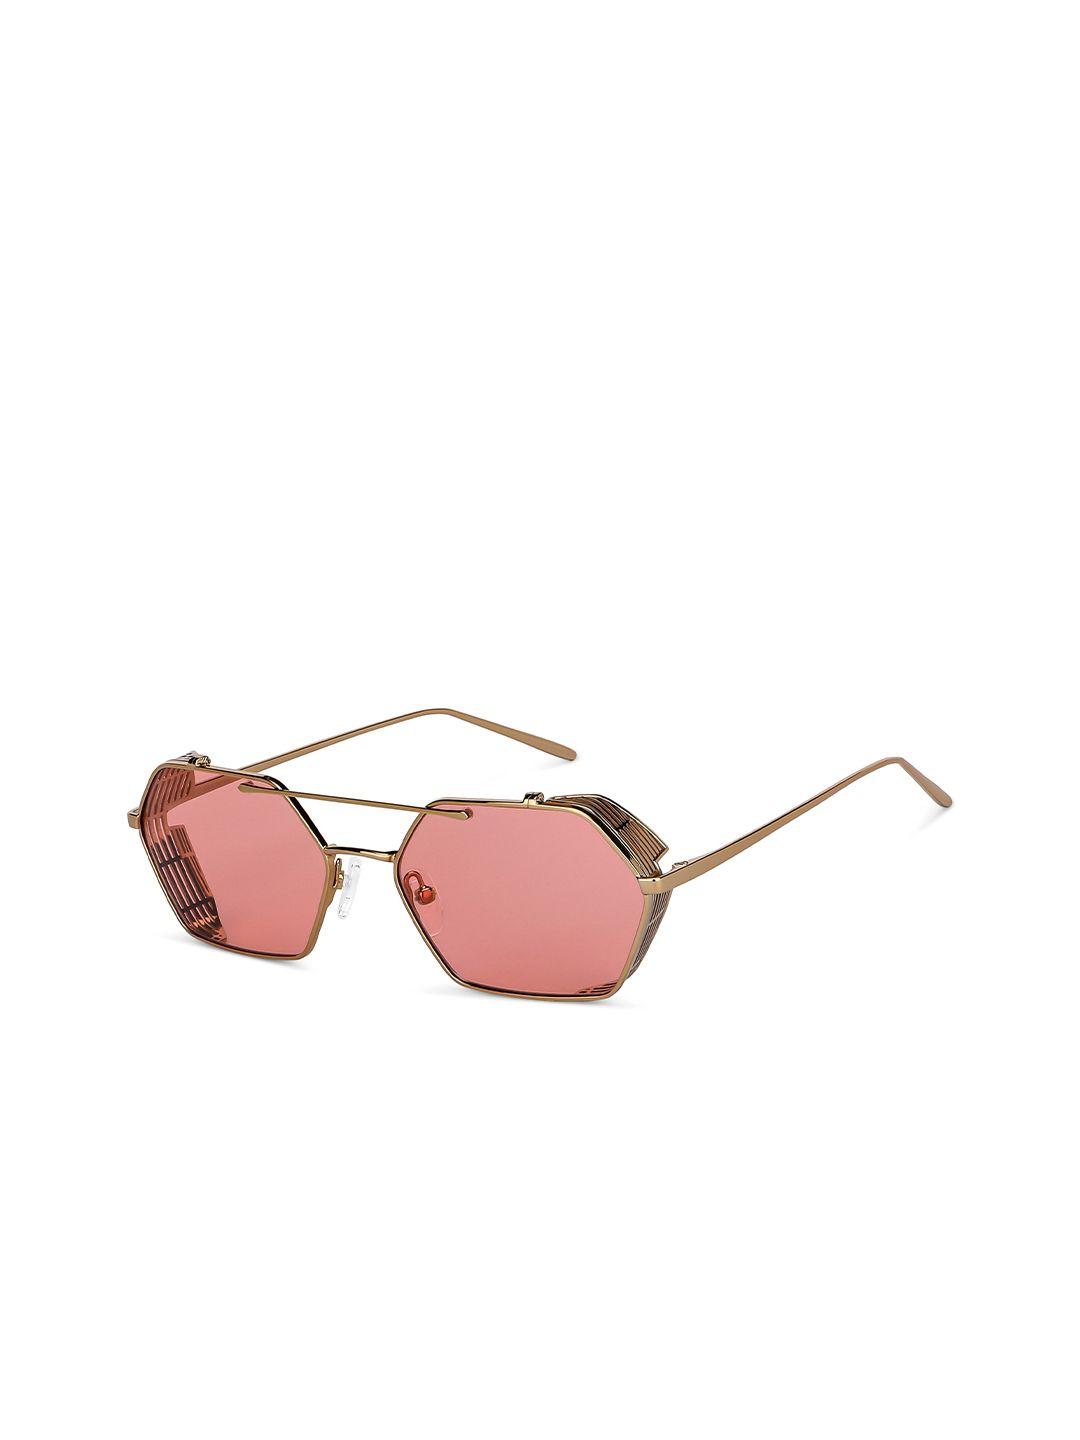 john jacobs unisex pink lens & gold-toned other sunglasses with uv protected lens